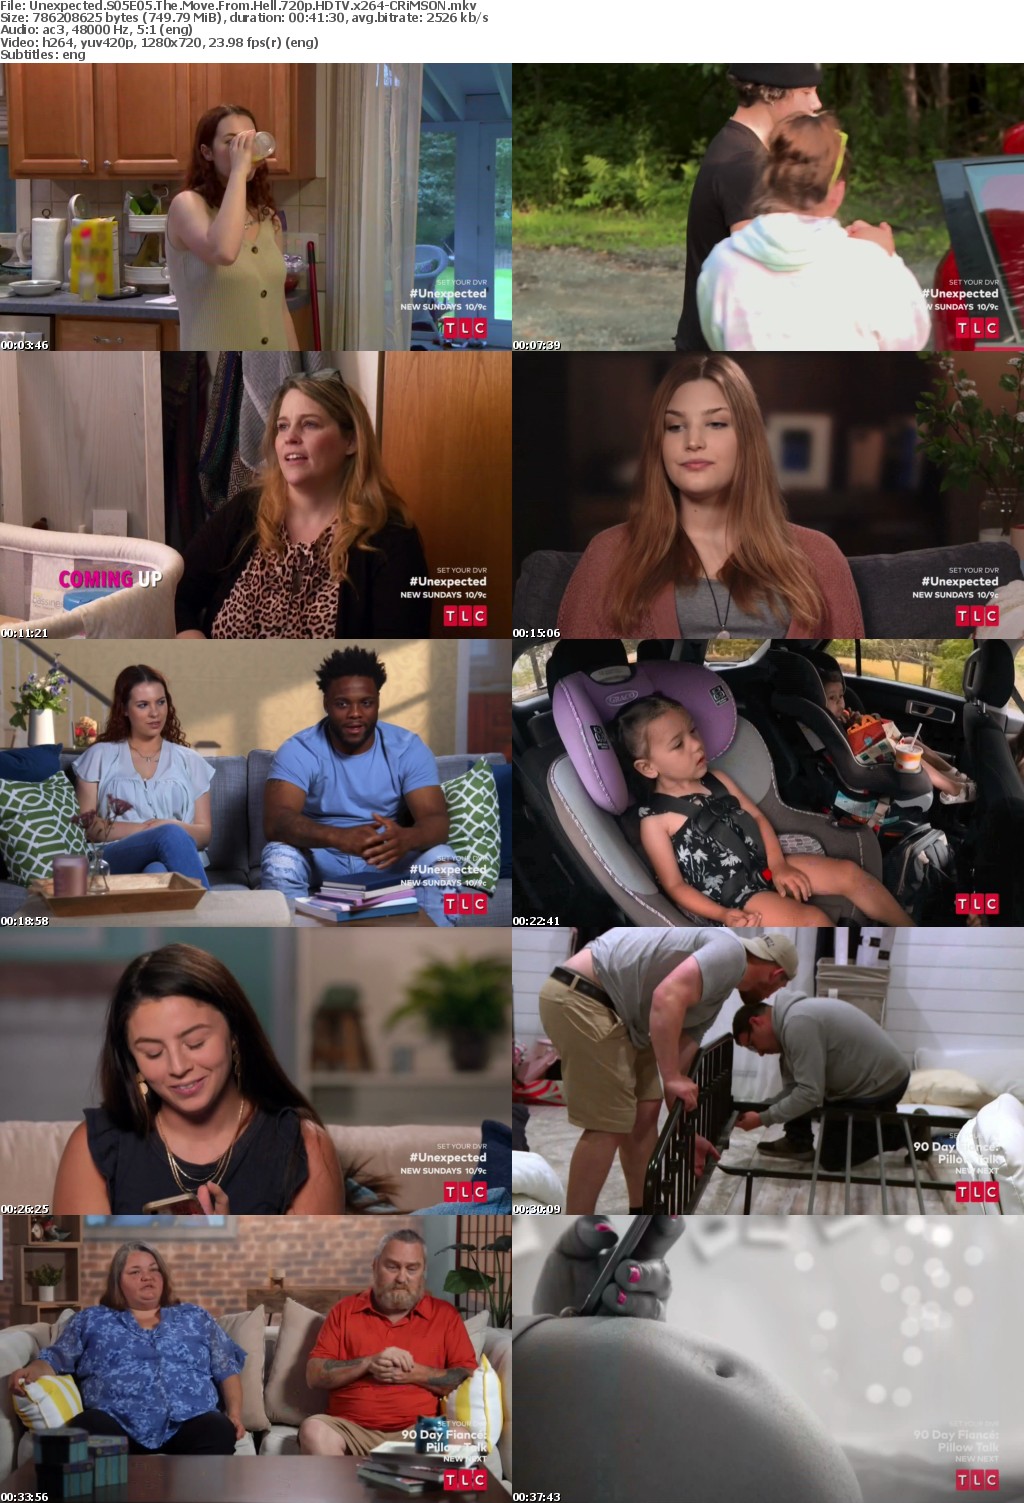 Unexpected S05E05 The Move From Hell 720p HDTV x264-CRiMSON